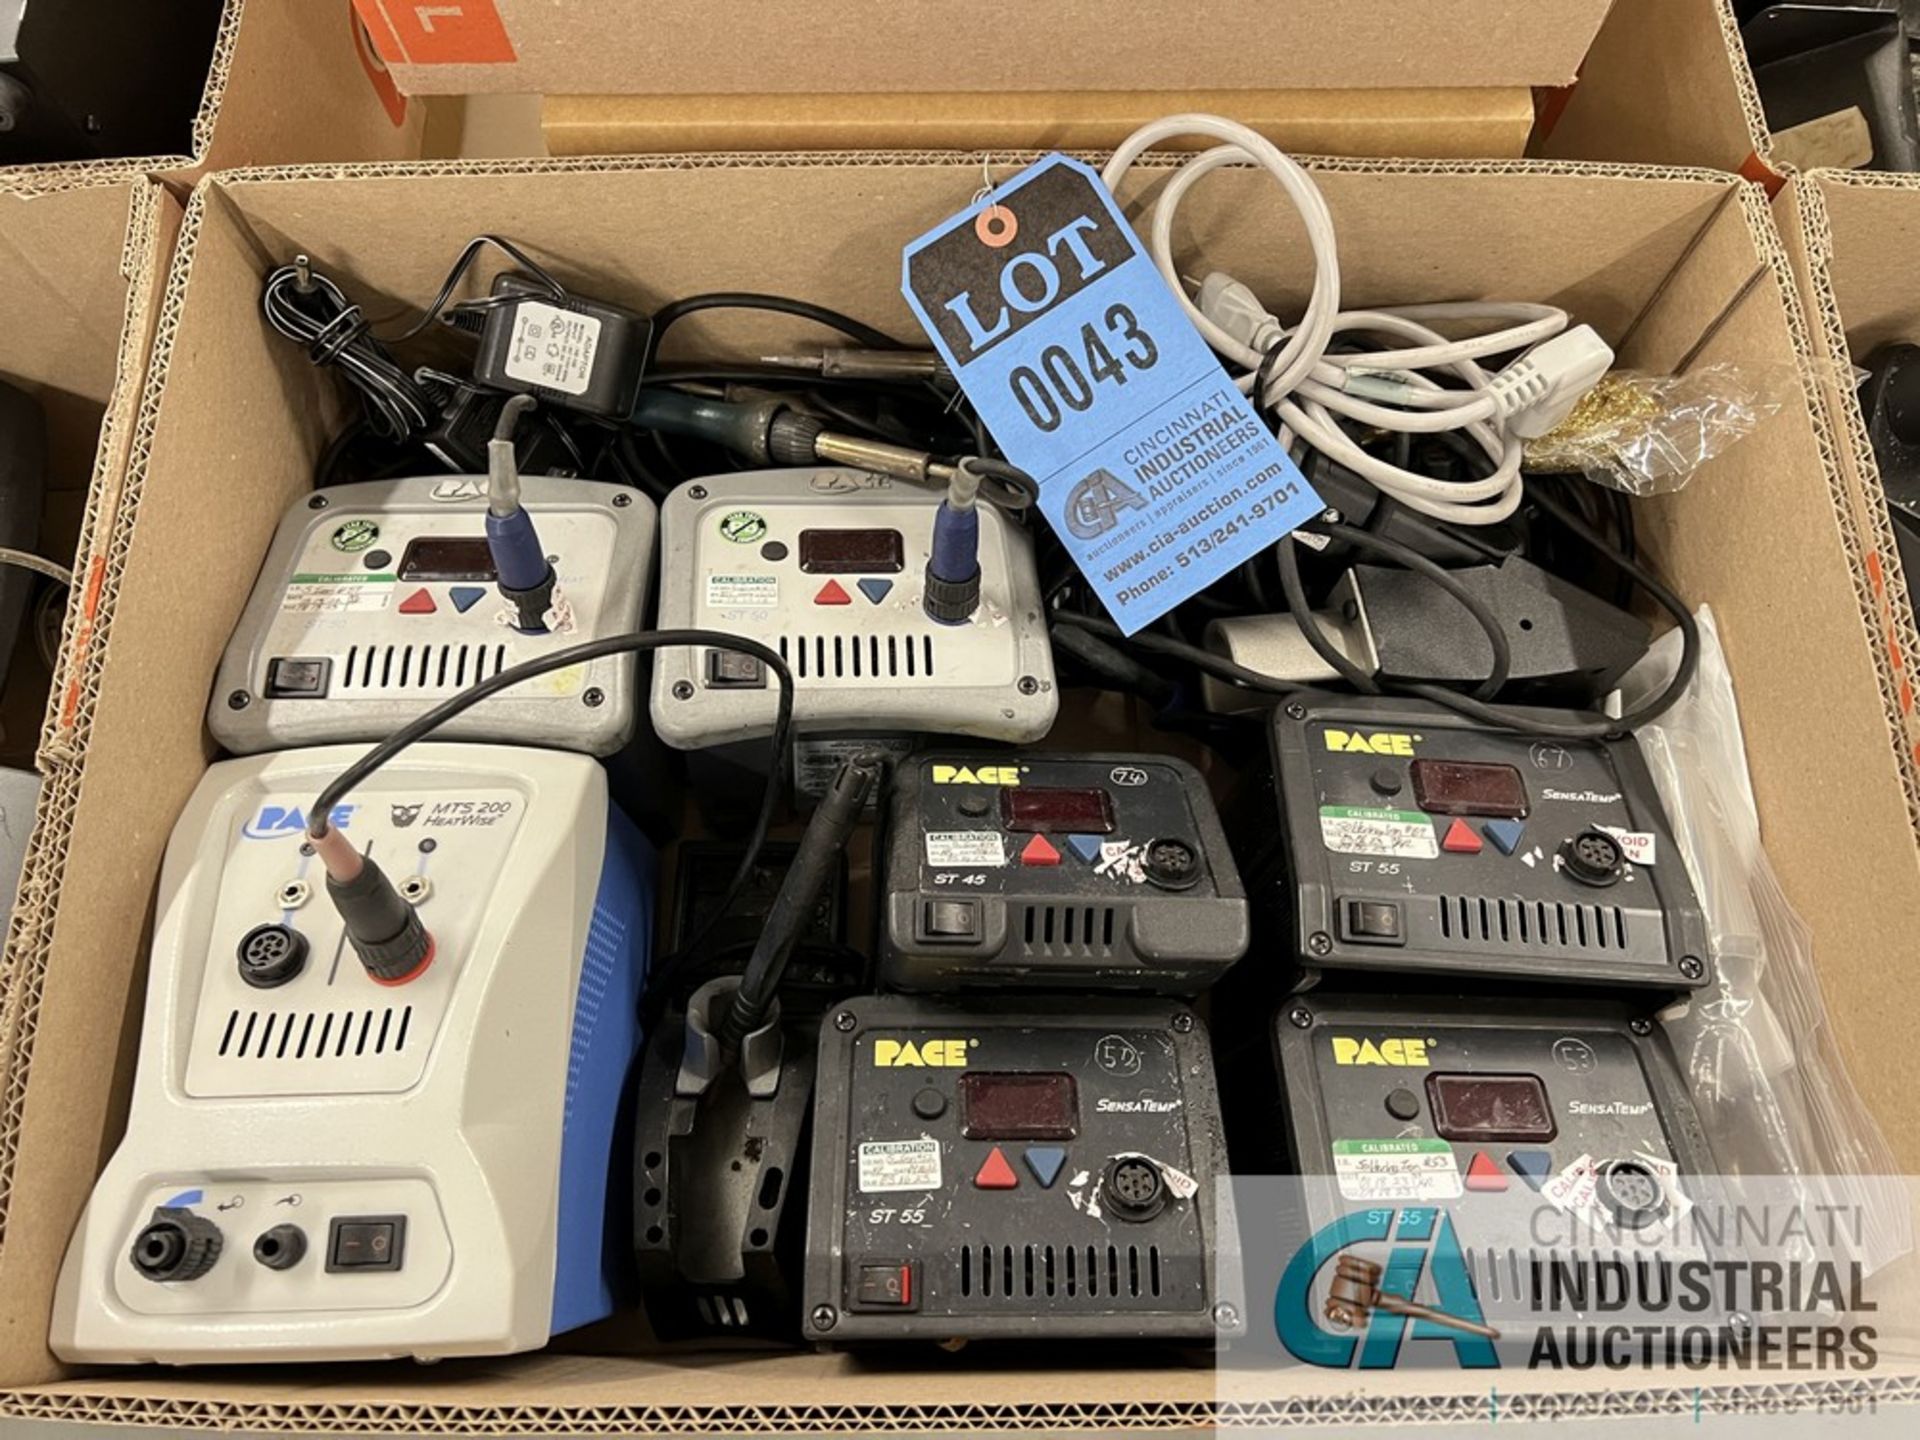 (LOT) (2) PACE MODEL ST-50, (4) PACE MODEL ST-55 SOLDERING STATIONS AND (1) PACE MTS-200 REWORK